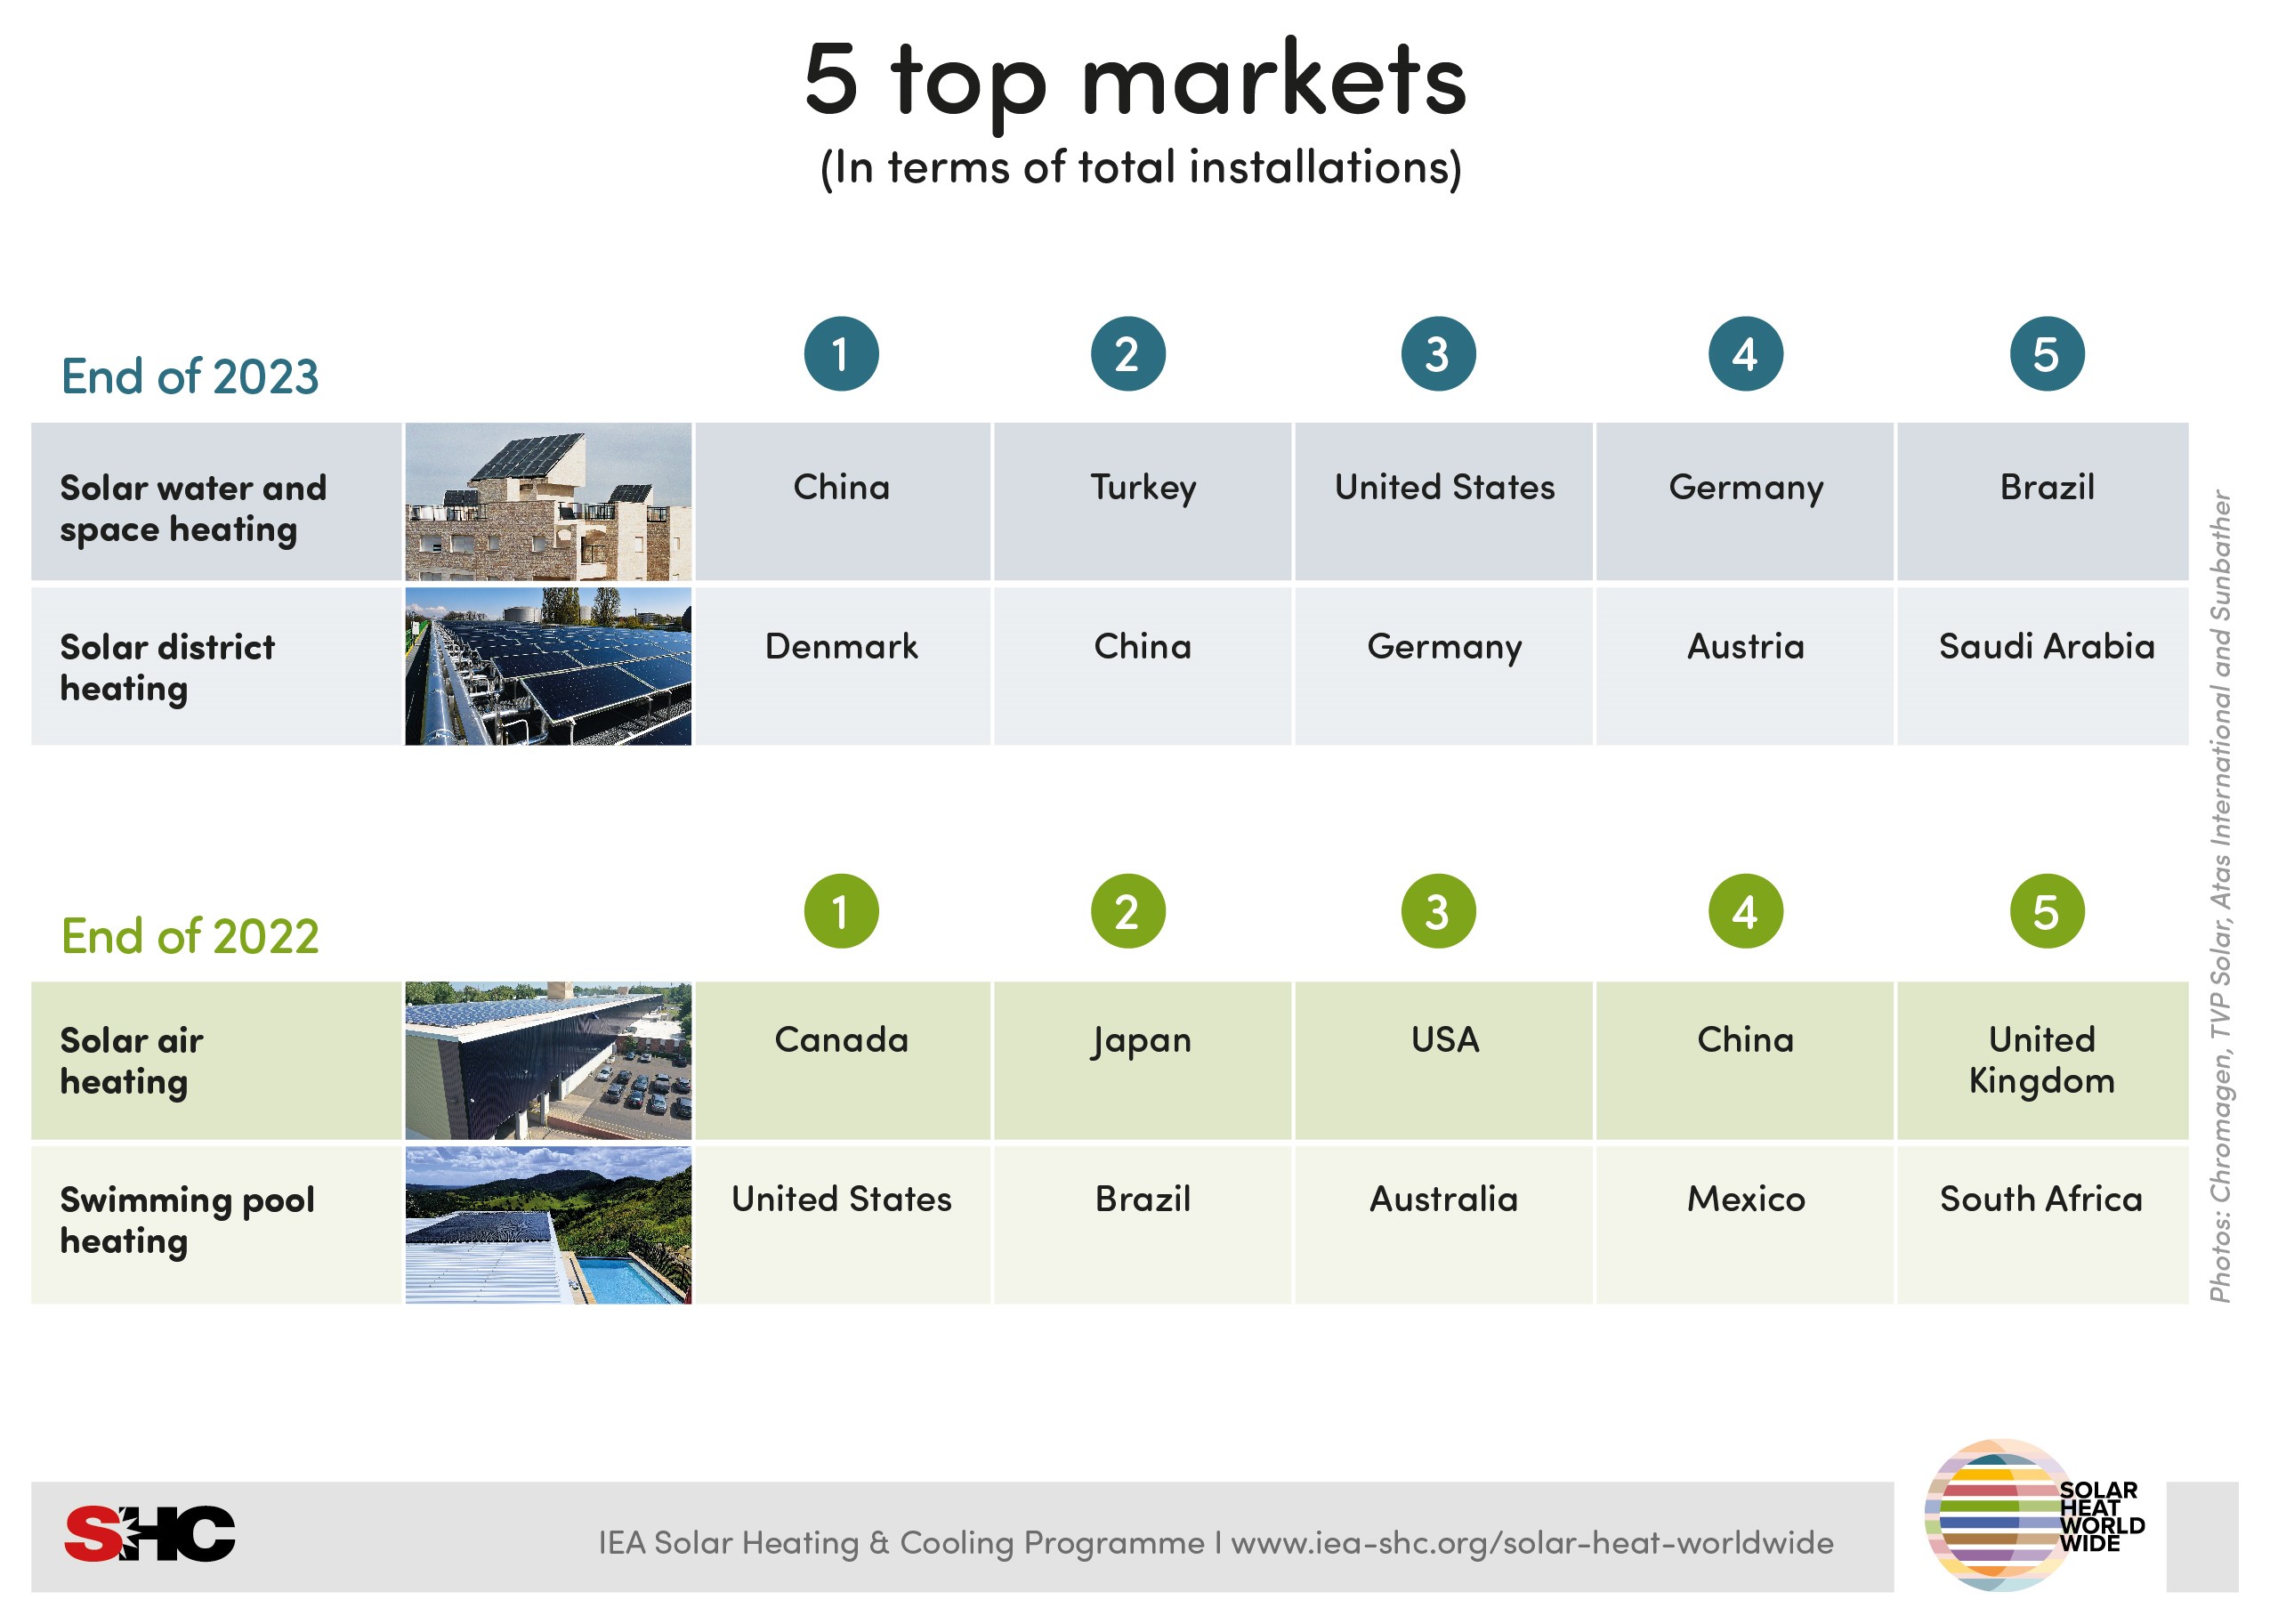 5 top markets - total installations